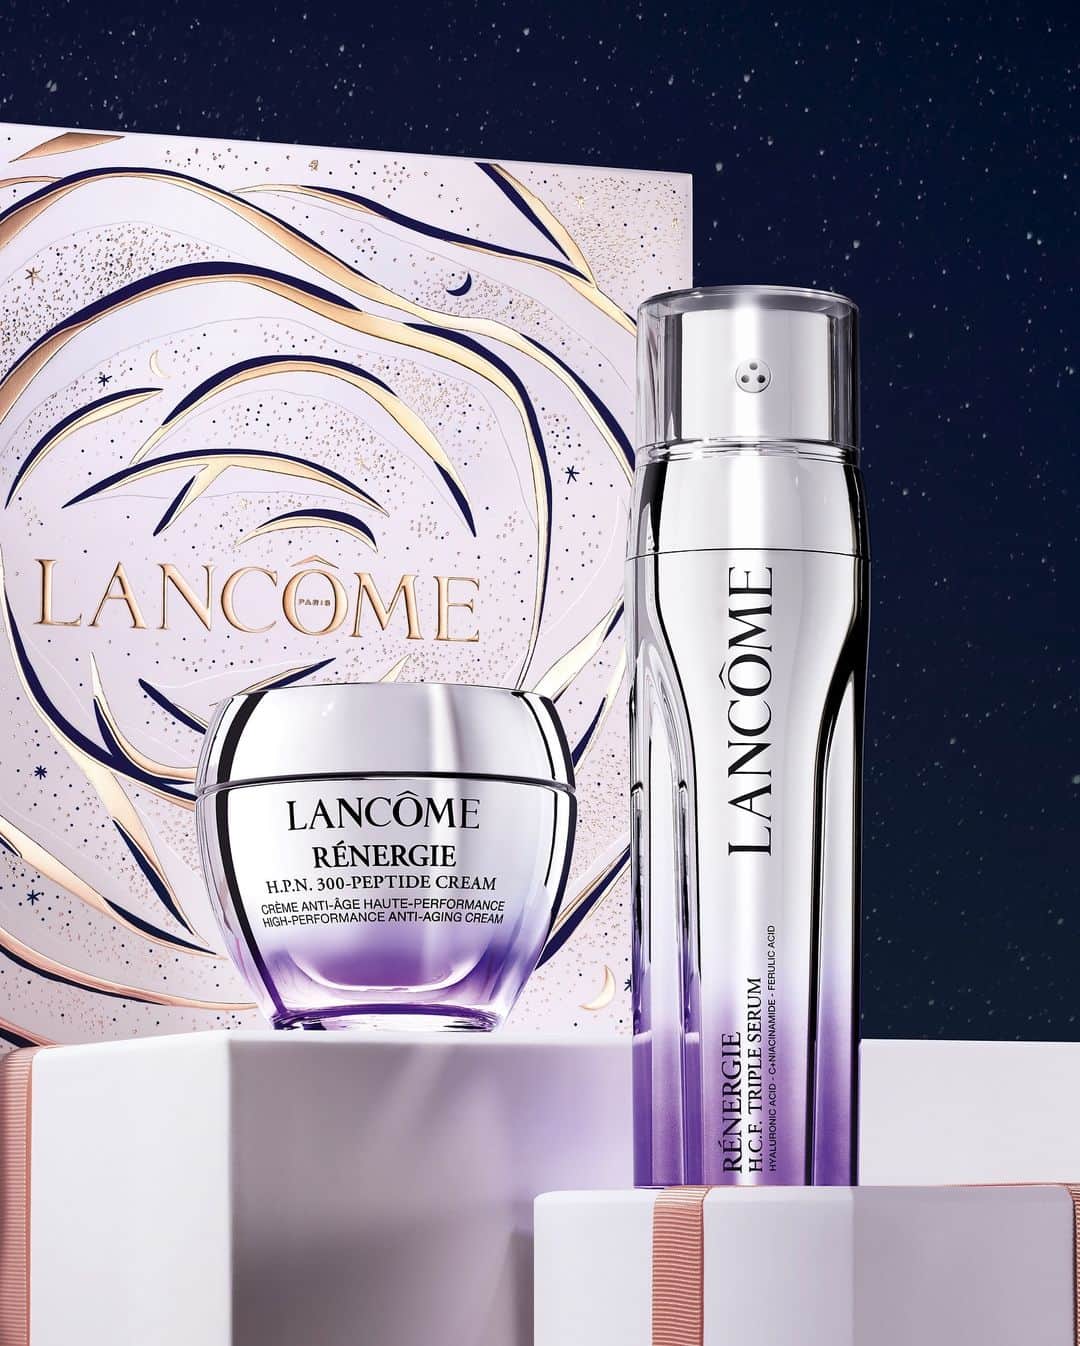 Lancôme Officialのインスタグラム：「Under the winter holidays stars, your skin will shine brighter than ever through the high-performance regenerating power of the Rénergie H.P.N. 300-Peptide Cream and Rénergie H.C.F. Triple Serum. Gift the extraordinary with Lancôme.  #Lancome #LancomexLouvre #Holiday23」